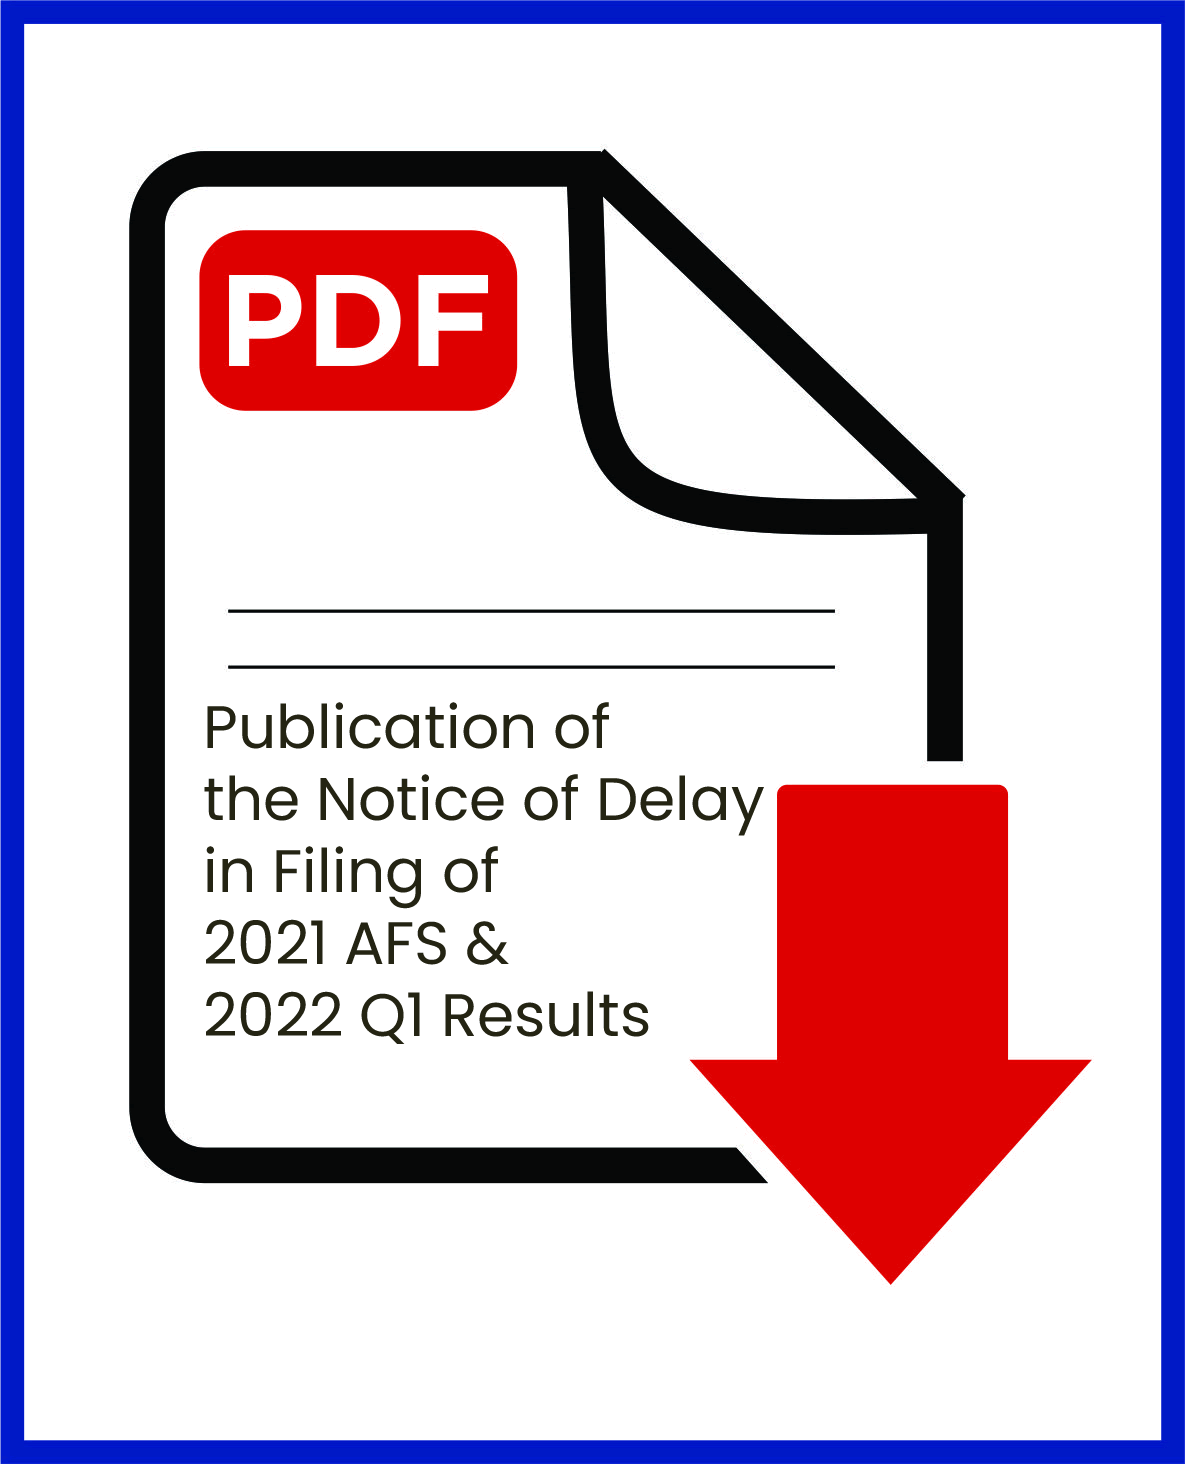 Publication of the Notice of Delay in Filing of 2021 AFS & 2022 Q1 Results (Guardian Newspaper)